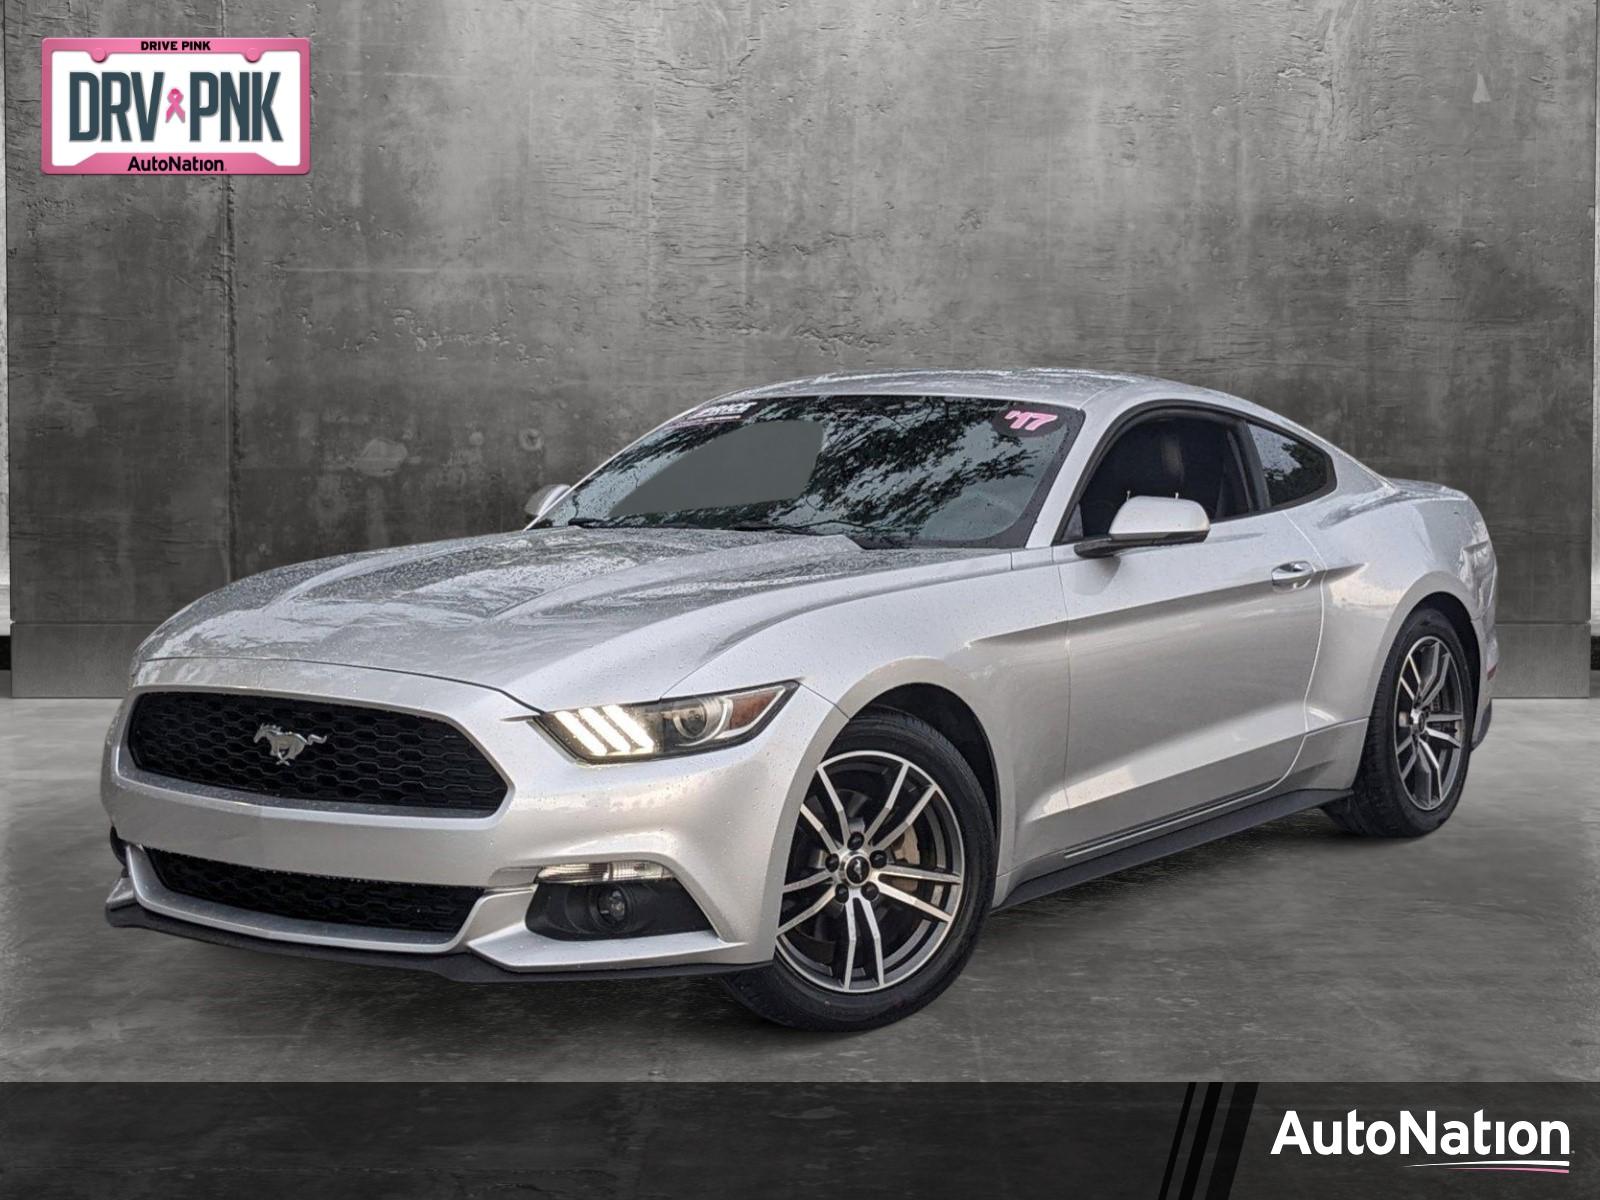 2017 Ford Mustang Vehicle Photo in Margate, FL 33063